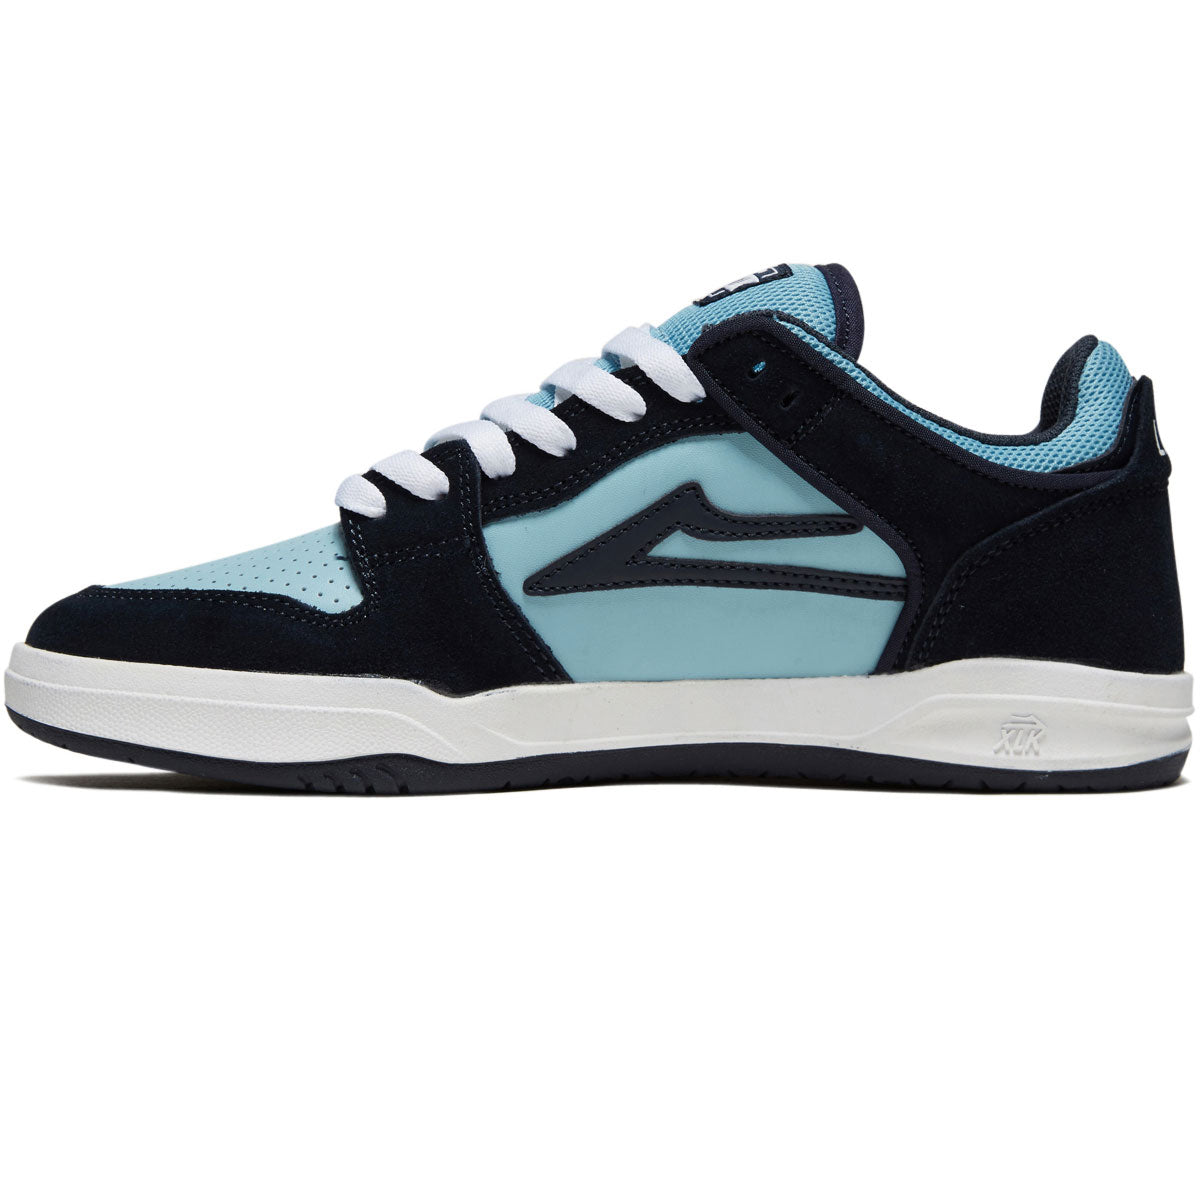 Lakai Telford Low Shoes - Navy Suede image 2